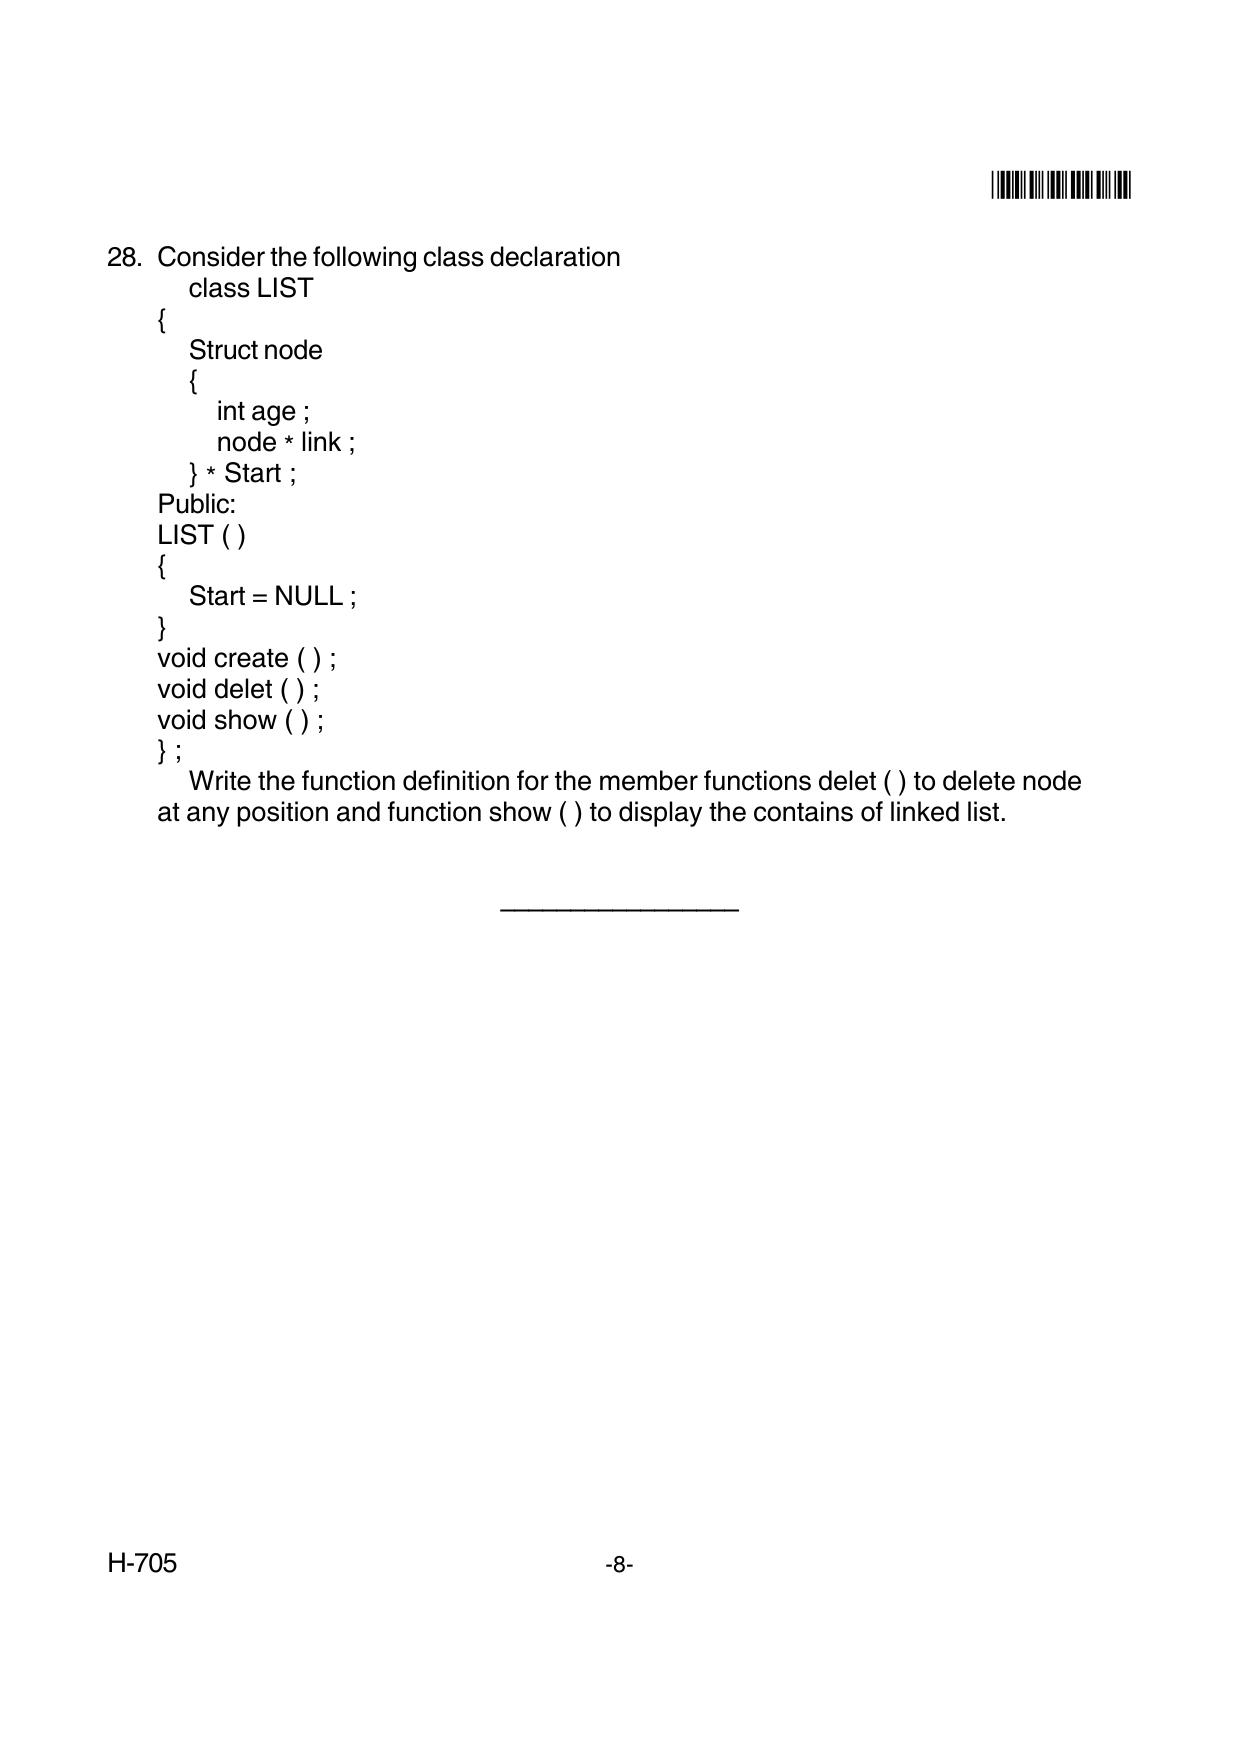 Goa Board Class 12 Computer Science  705 New Pattern Paper 2 (June 2018) Question Paper - Page 8